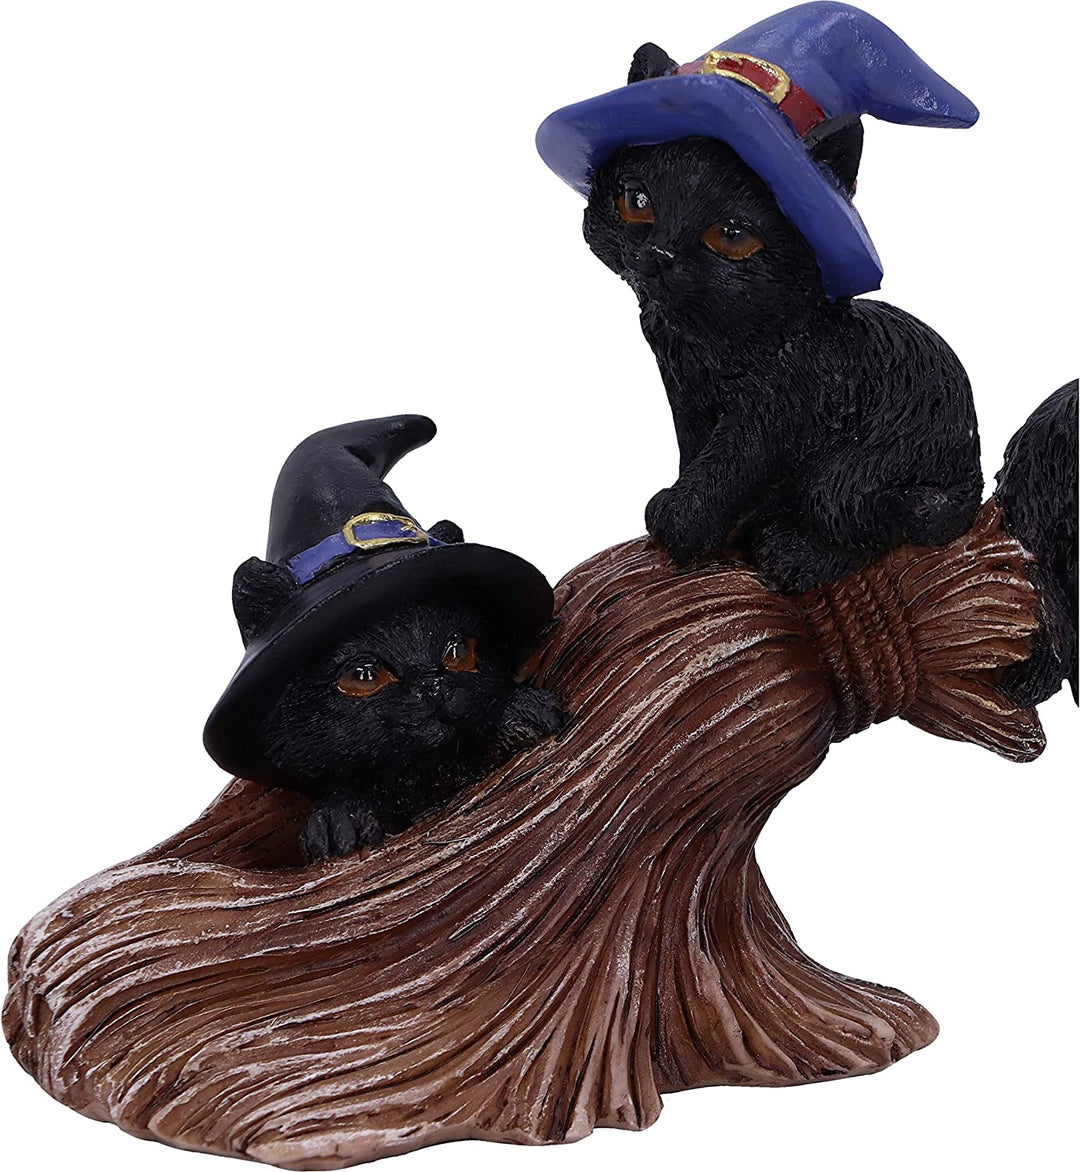 Nemesis Now Purrfect Broomstick Witches Familiar Black Cats und Broomstick Figur